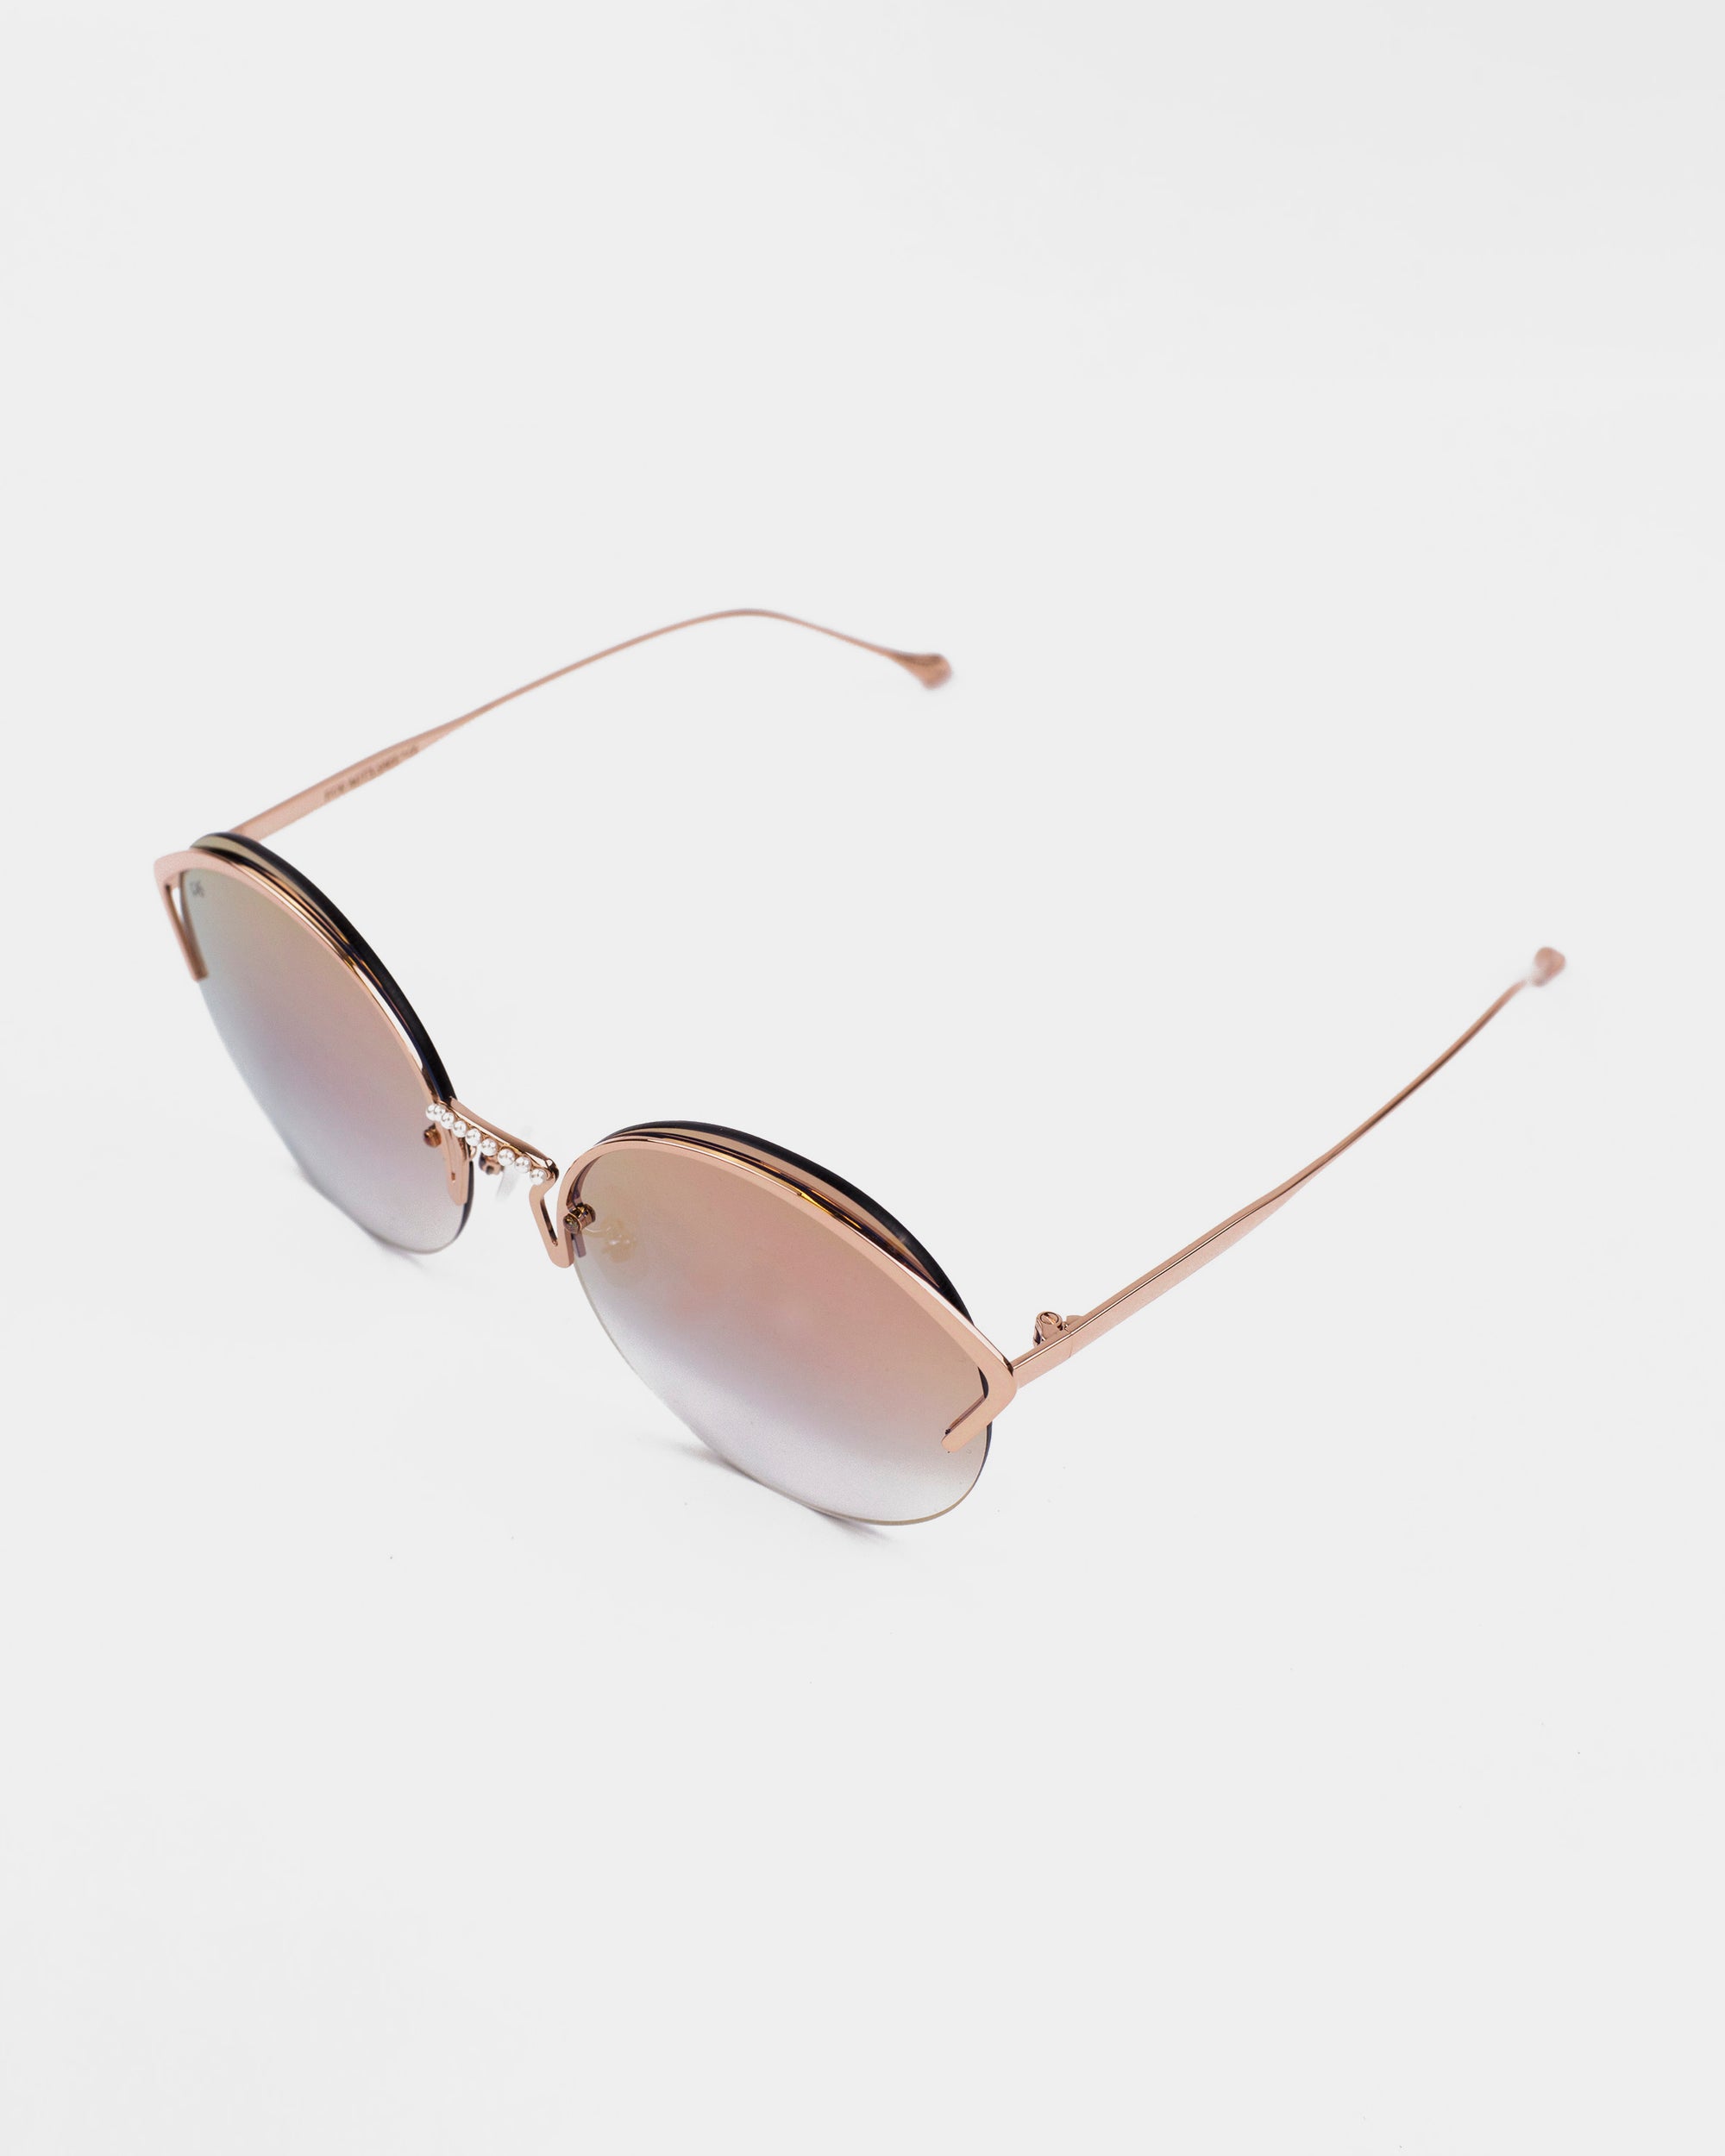 A pair of round, gold-framed For Art&#39;s Sake® Margarita sunglasses with brown gradient nylon lenses offering UV protection. The sunglasses feature thin temples and a stylish, minimalist design, set against a white background.